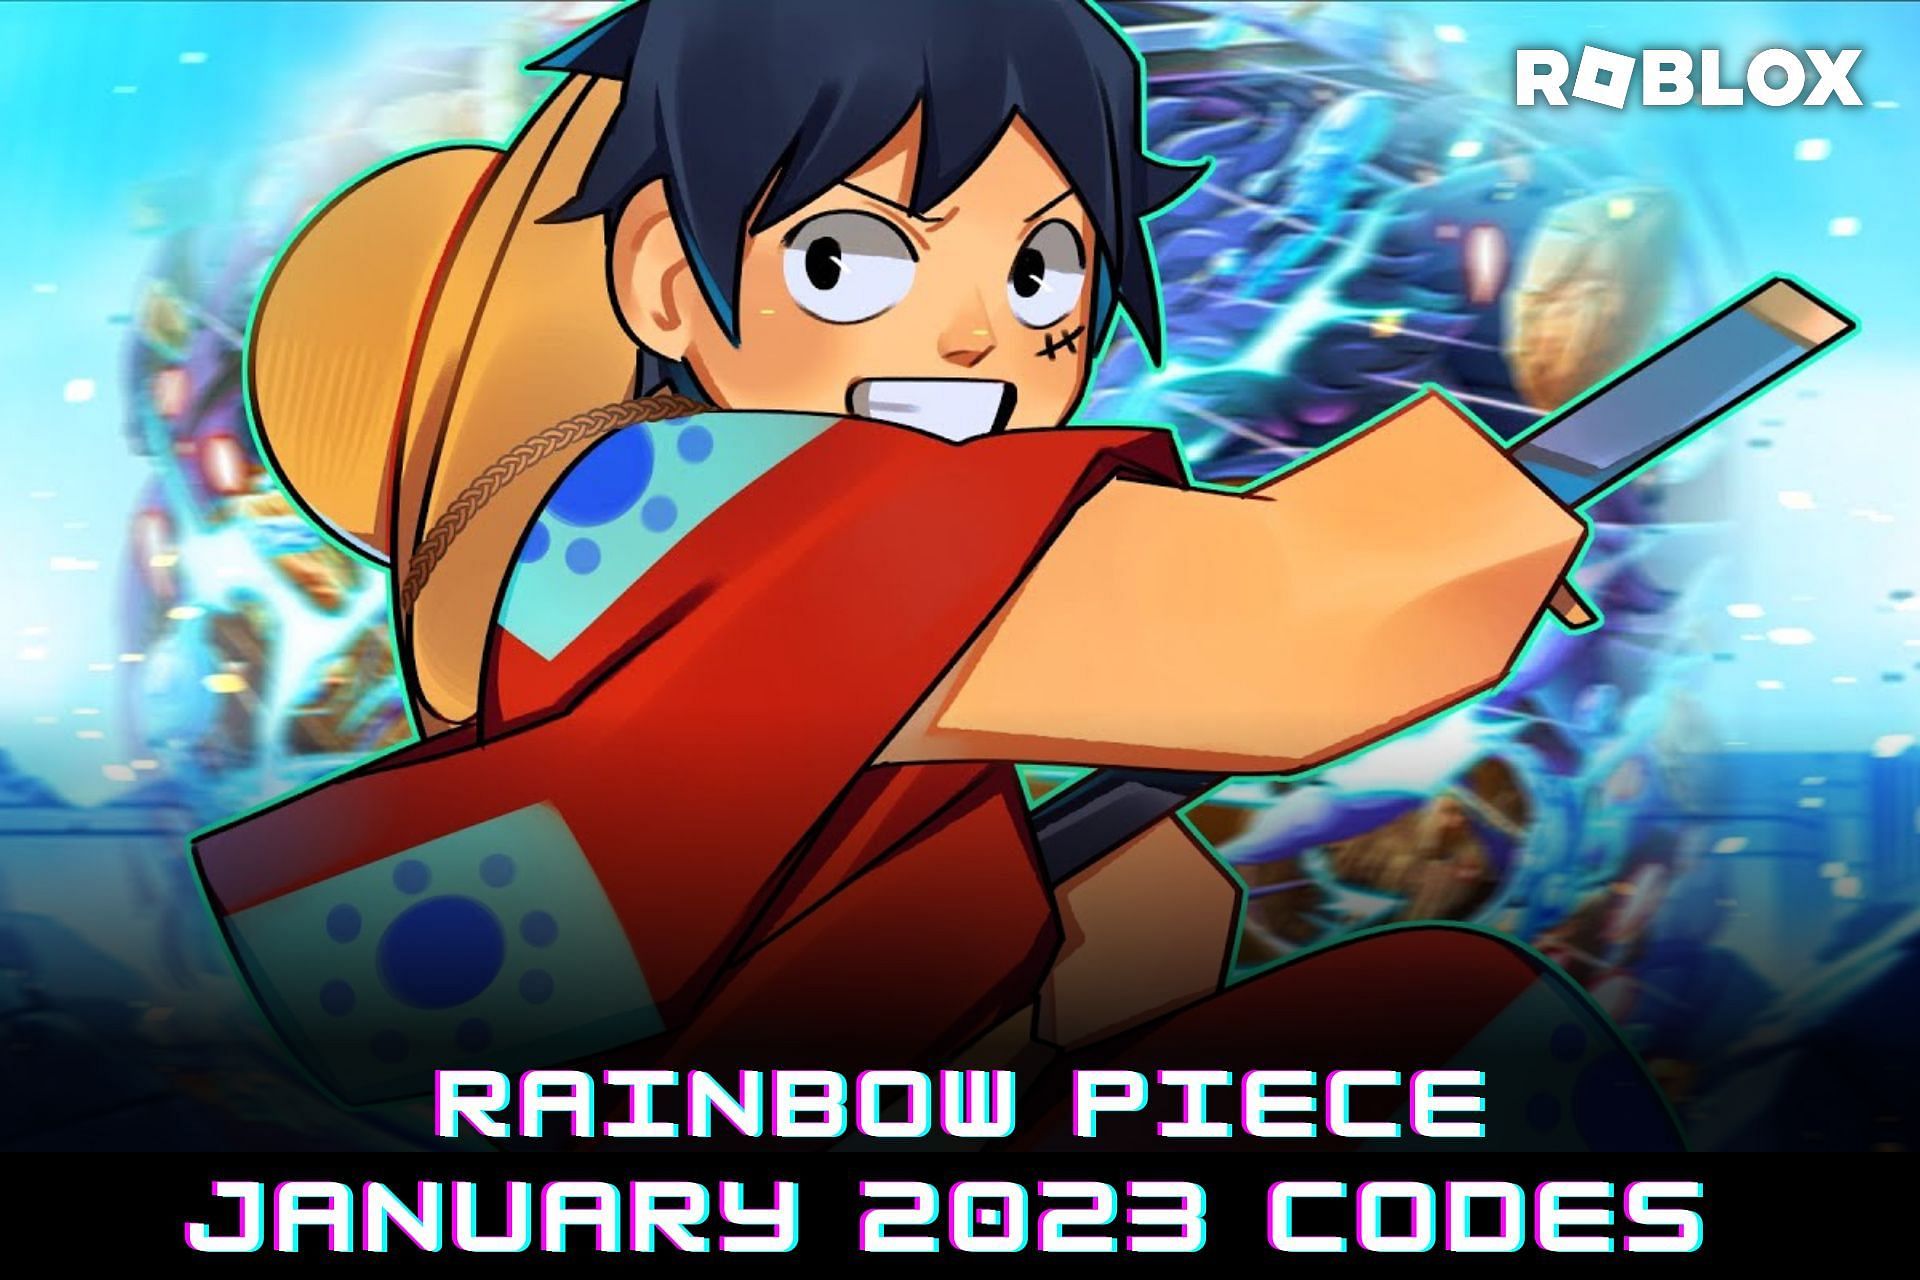 Roblox: All A One Piece Game Codes (January 2023)